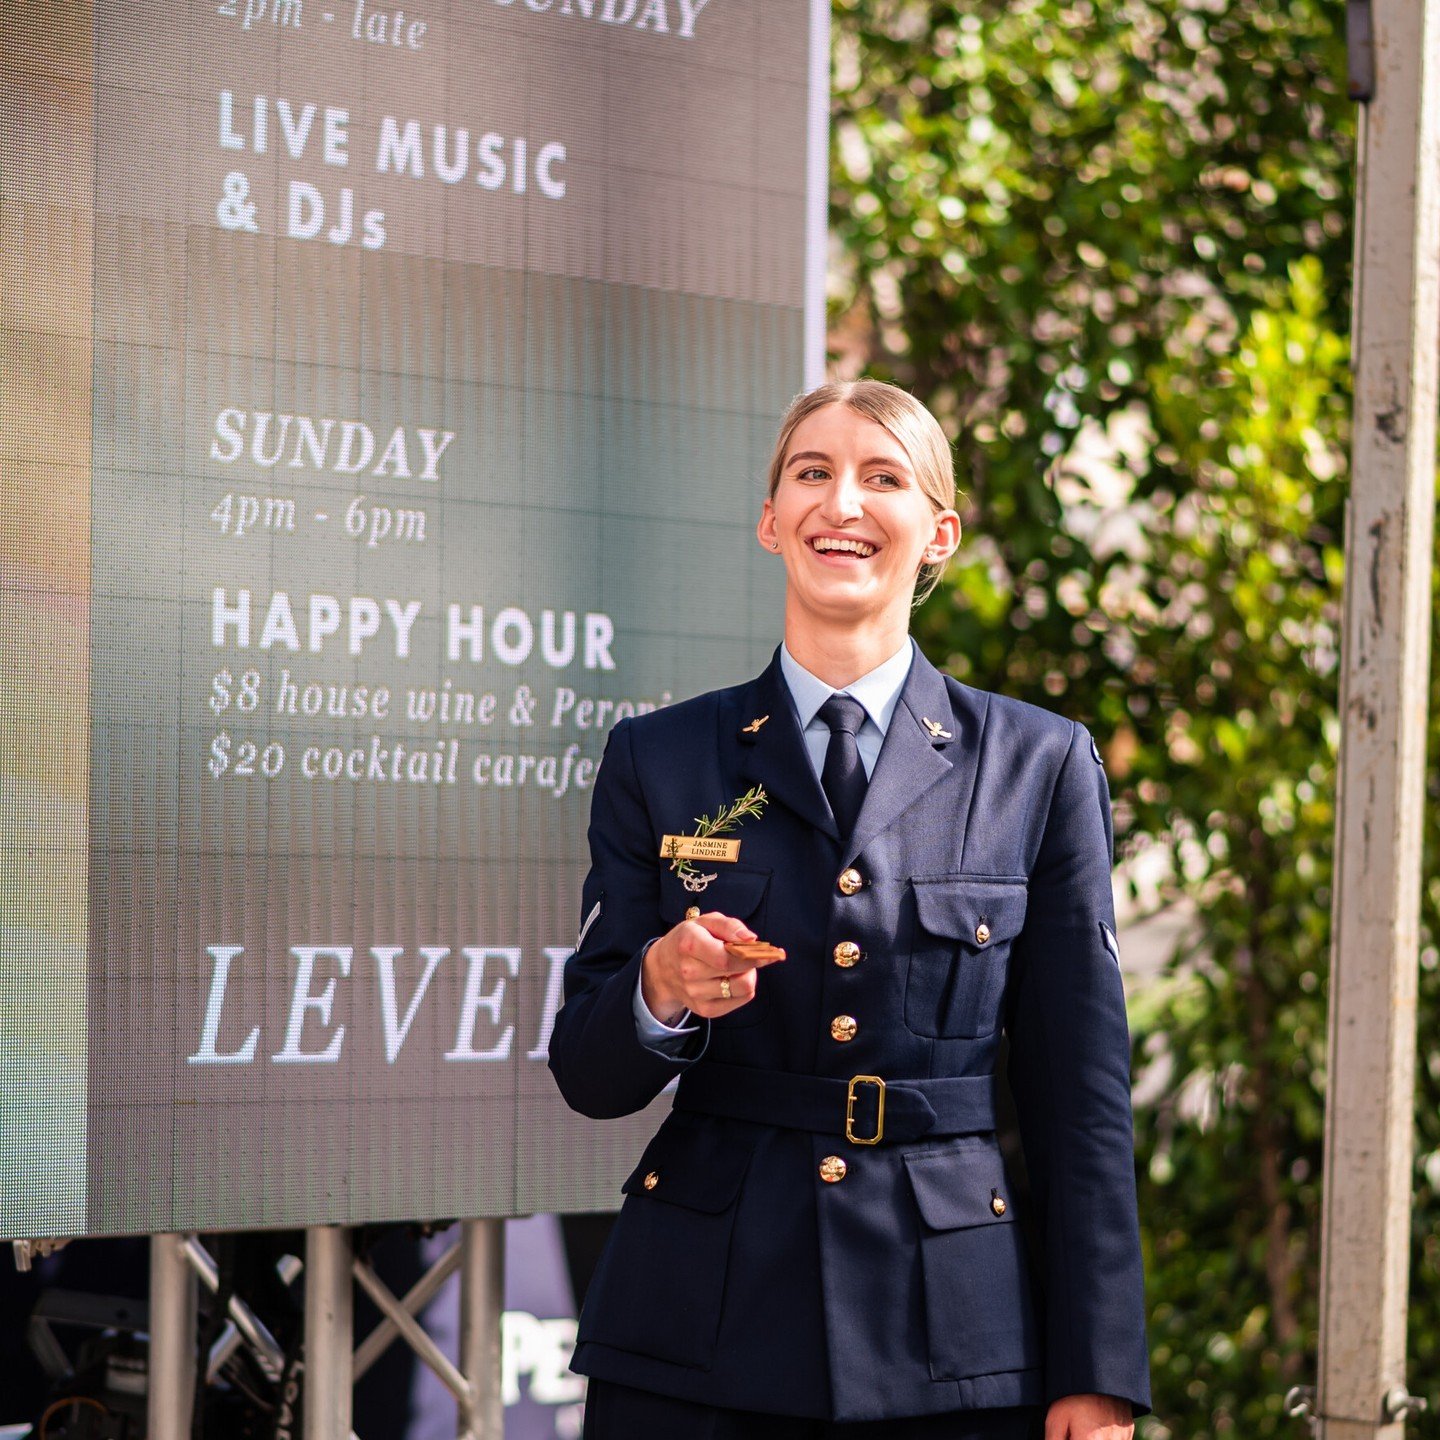 Anzac Day at Cruise Bar ⚓

Join us from 12pm in the courtyard for a huge game of Two-Up and take part in this century-old tradition. 

You&rsquo;ll enjoy live entertainment and our full restaurant menu on level 1.

Details via link in bio.